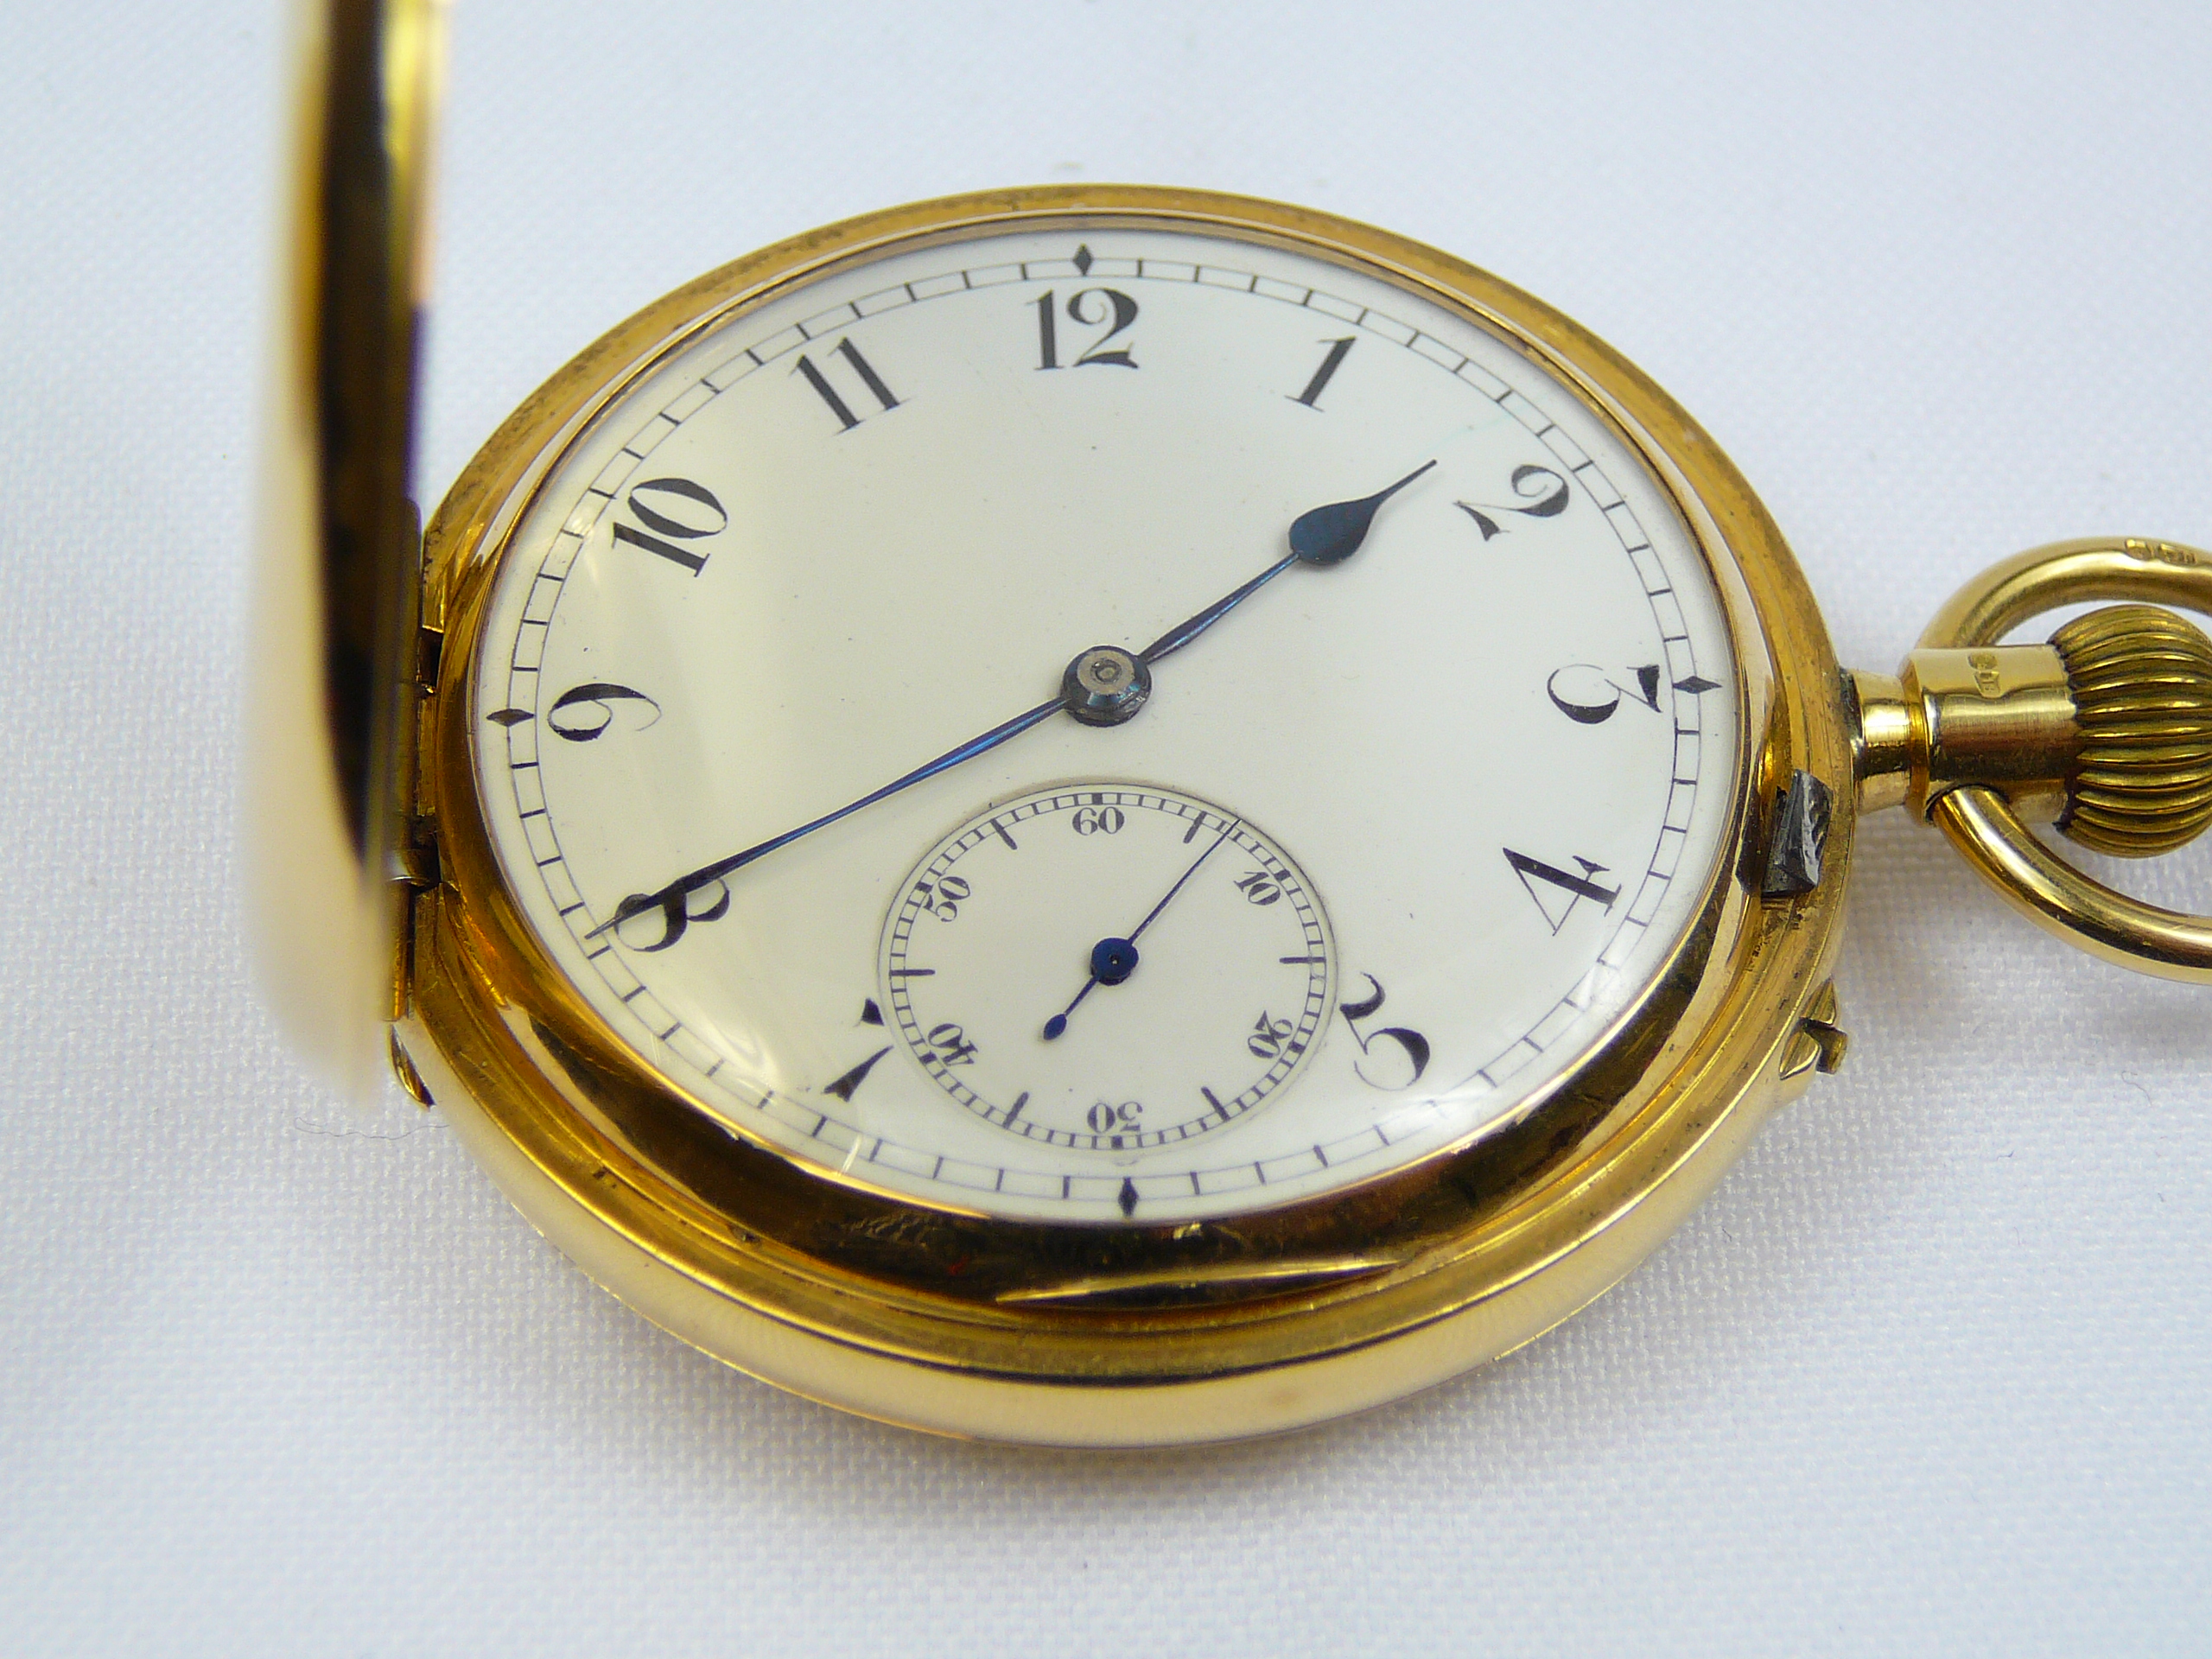 Gents gold pocket watch - Image 2 of 7